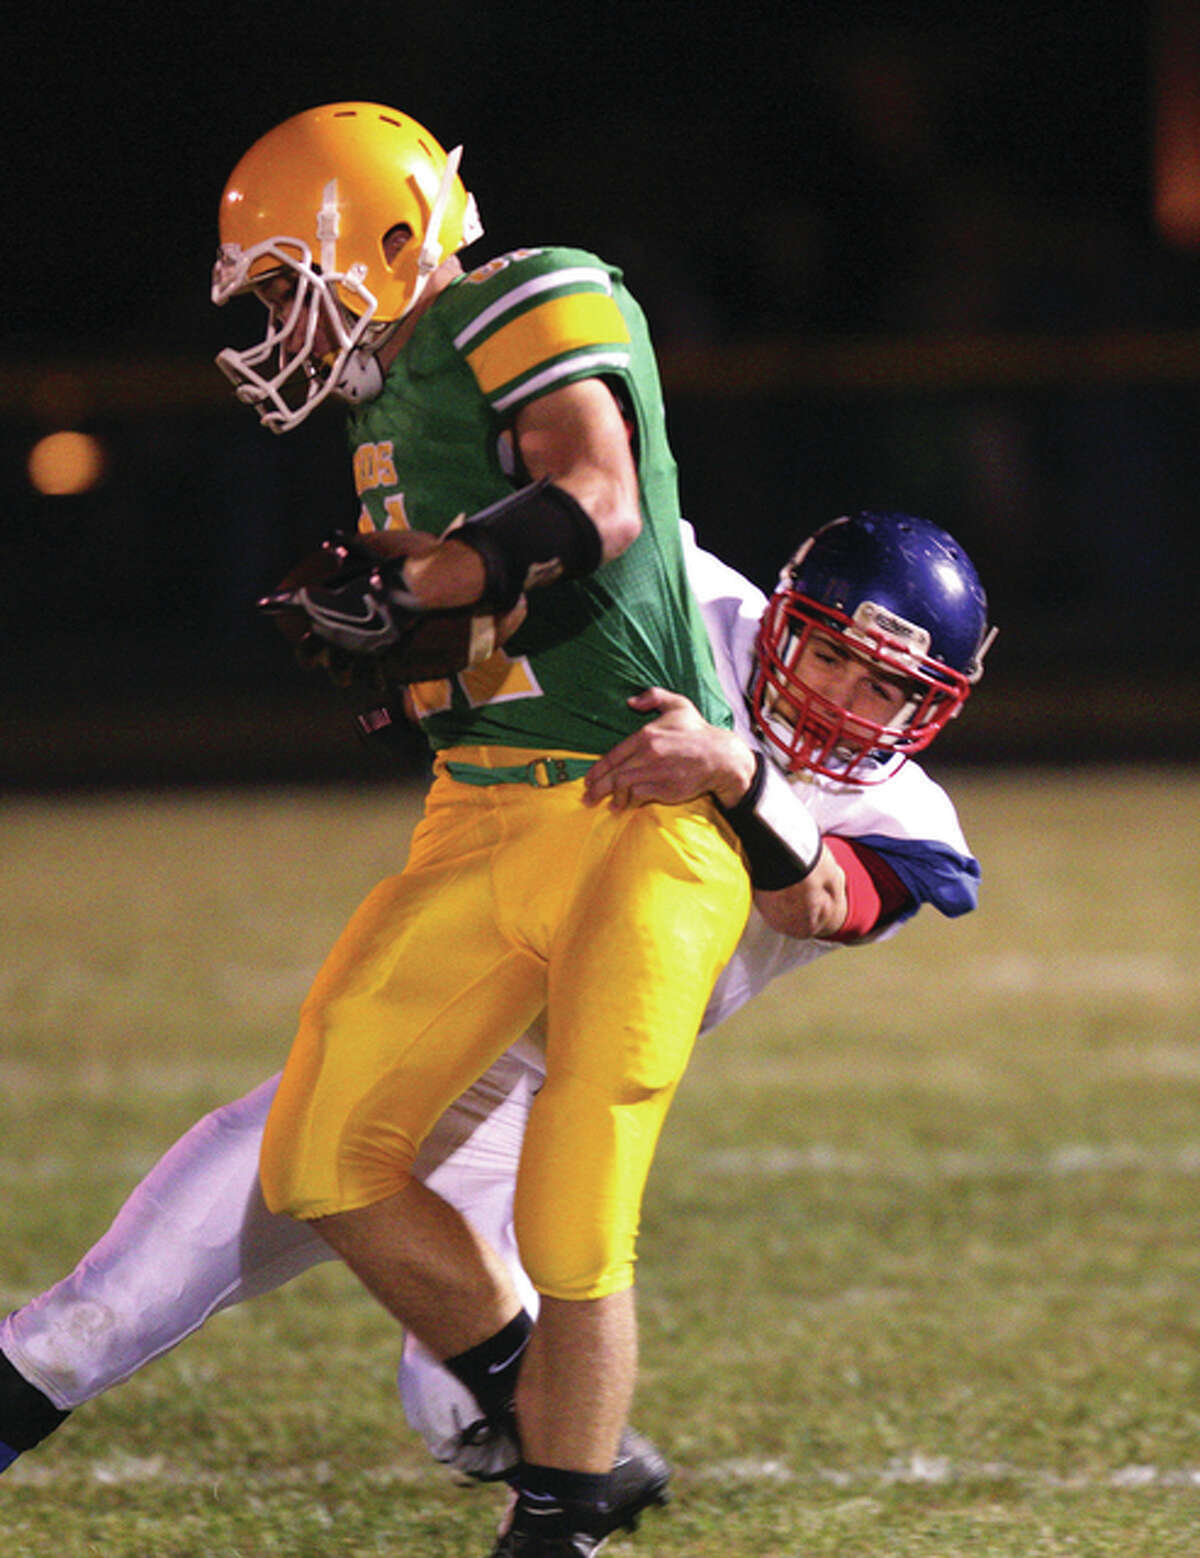 After pulling in a pass, Southwestern’s Michael Nolte (front) gets pulled down by Carlinville’s Jacob Dixon during the first half of last Friday night’s South Central Conference game at Knapp Field in Piasa. The Piasa Birds play at Roxana, while Carlinville plays host to Litchfield on Friday.